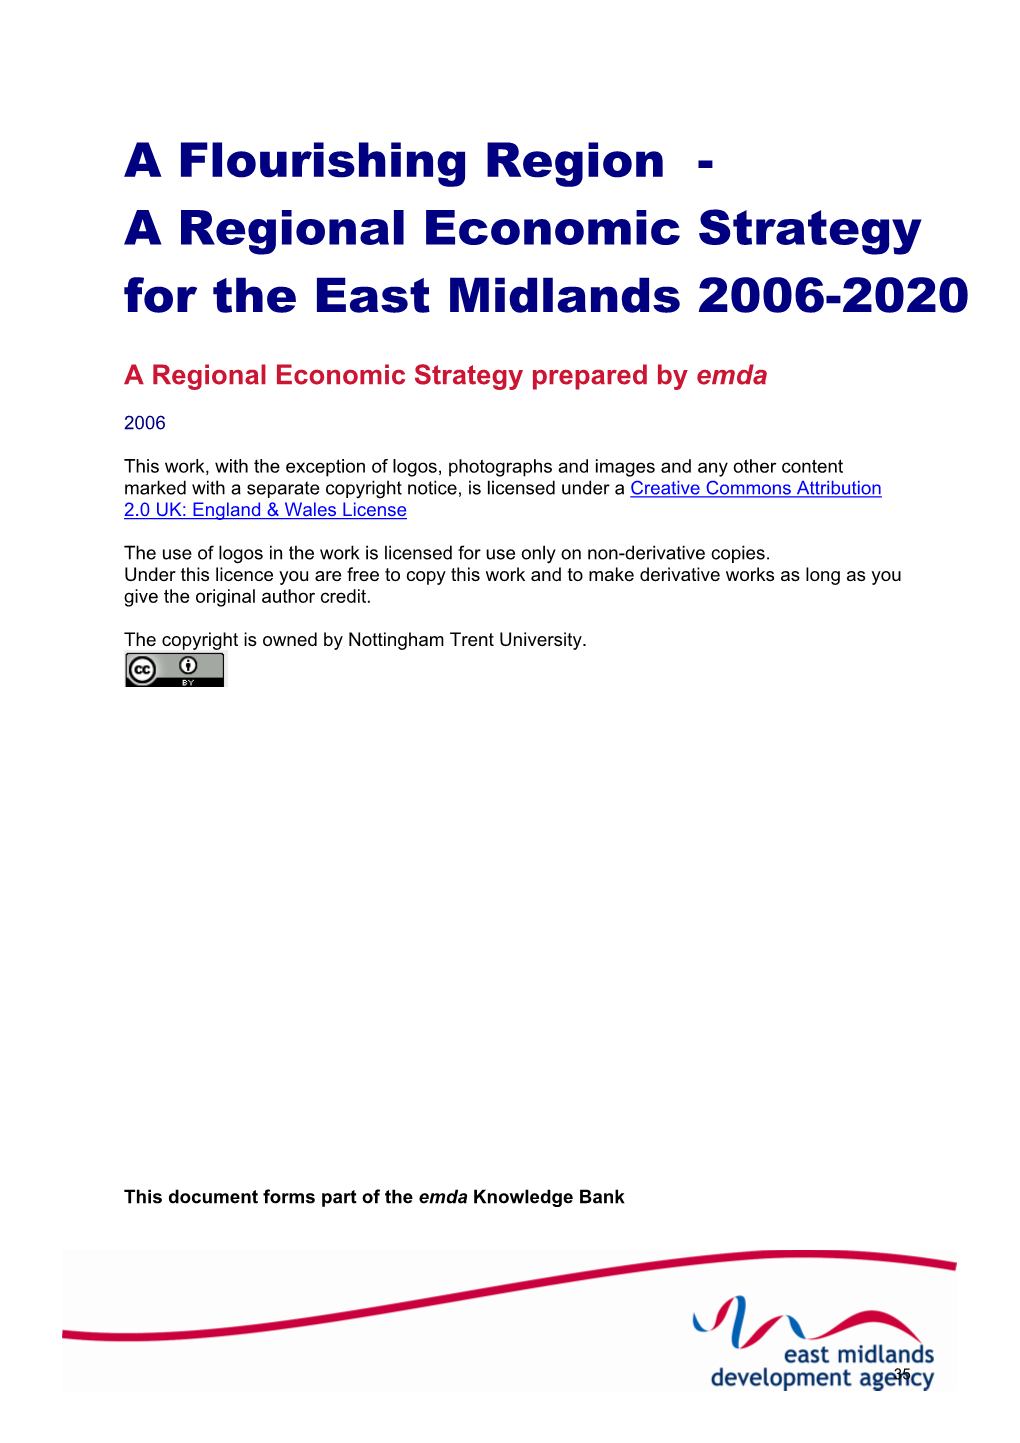 A Regional Economic Strategy for the East Midlands 2006-2020